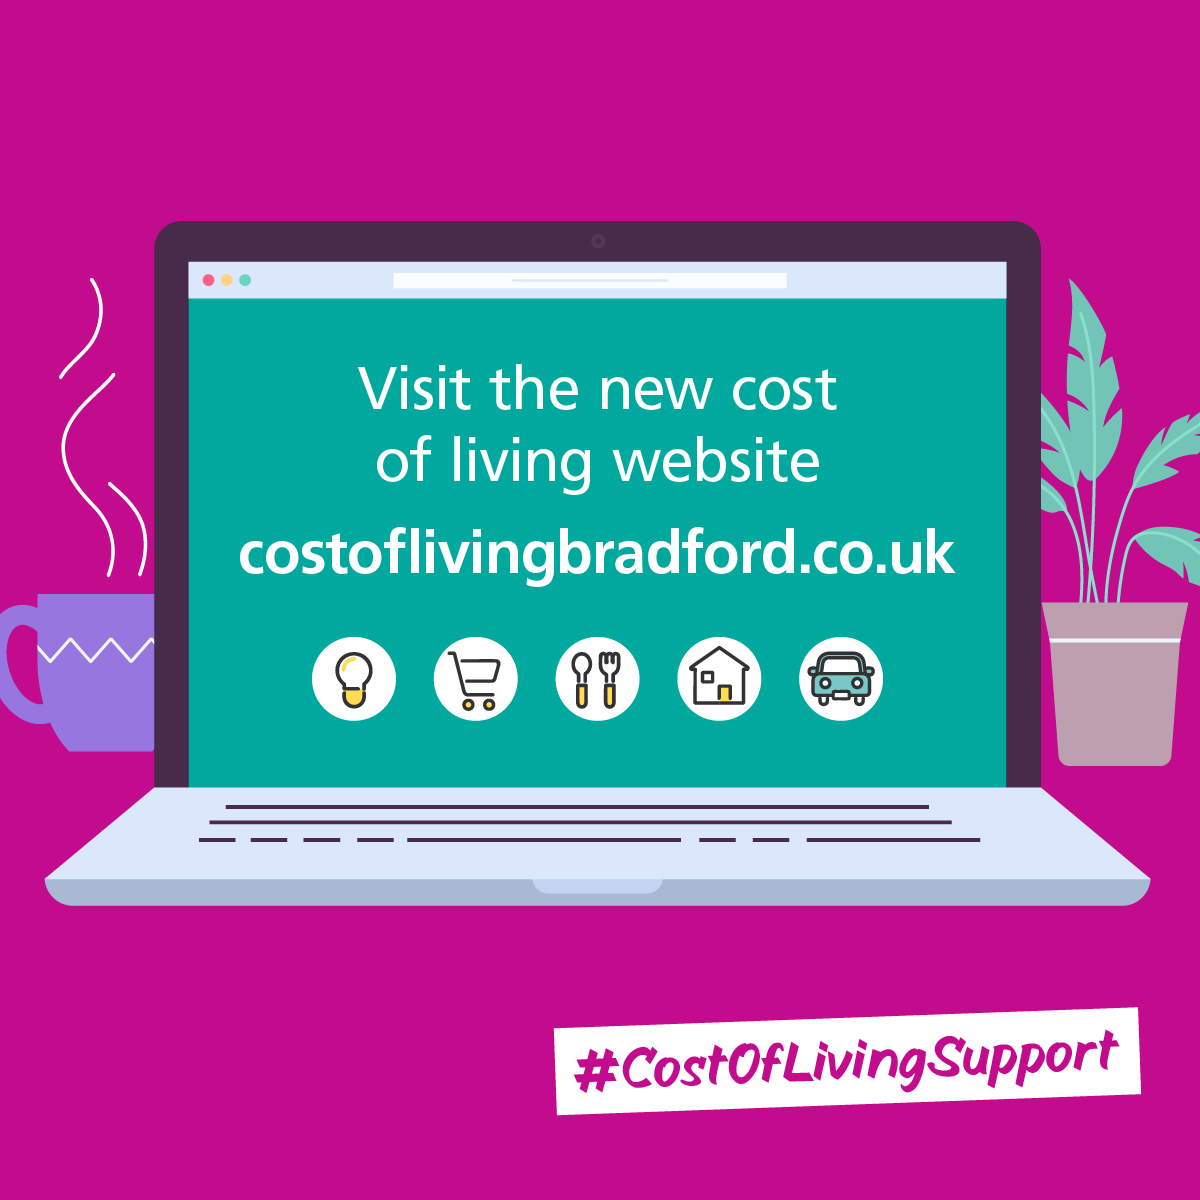 Help is out there to support you with the rising cost of living. Visit costoflivingbradford.co.uk for info on energy and bills, housing, food costs and much more… #CostOfLivingSupport